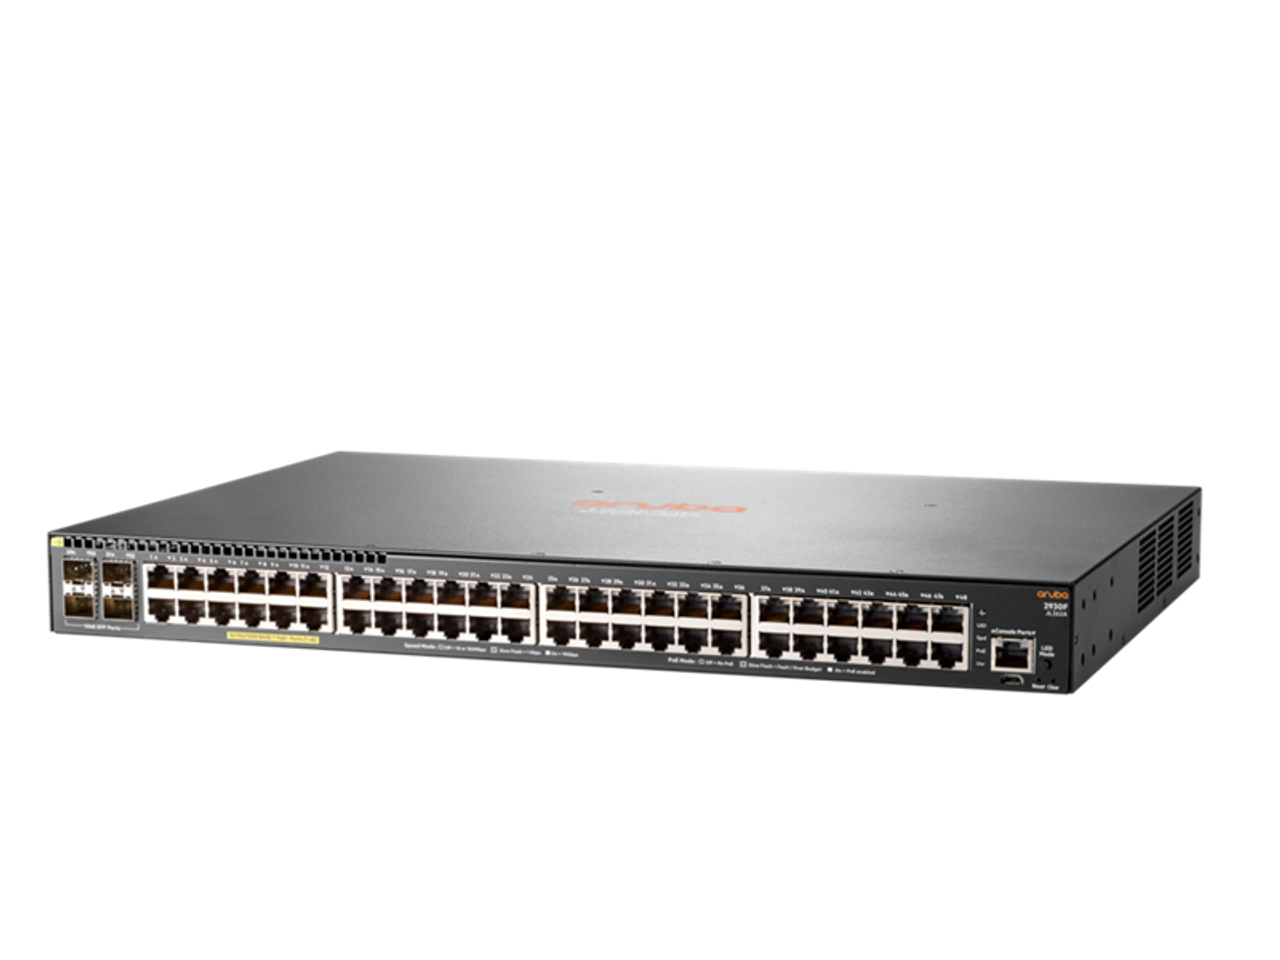 Aruba 2930F 48-Port Gigabit PoE+ 370W Stackable Layer 3 Managed Switch with 4x SFP